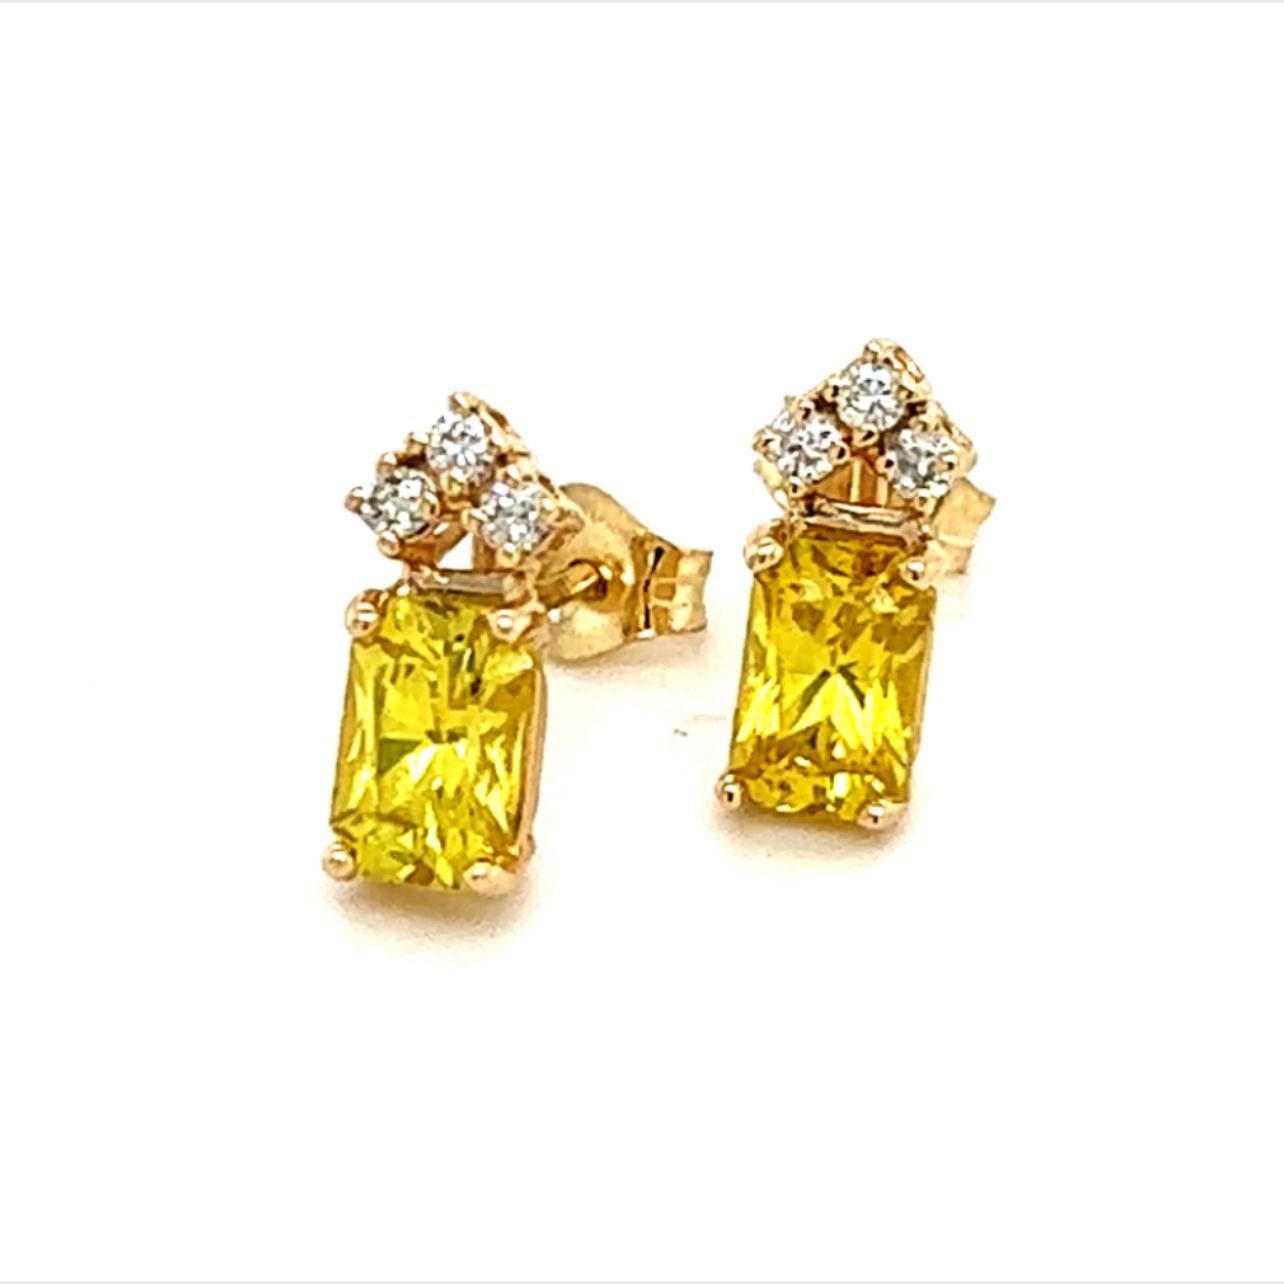 Natural Sapphire Diamond Earrings 14k Gold 1.74 TCW Certified For Sale 2